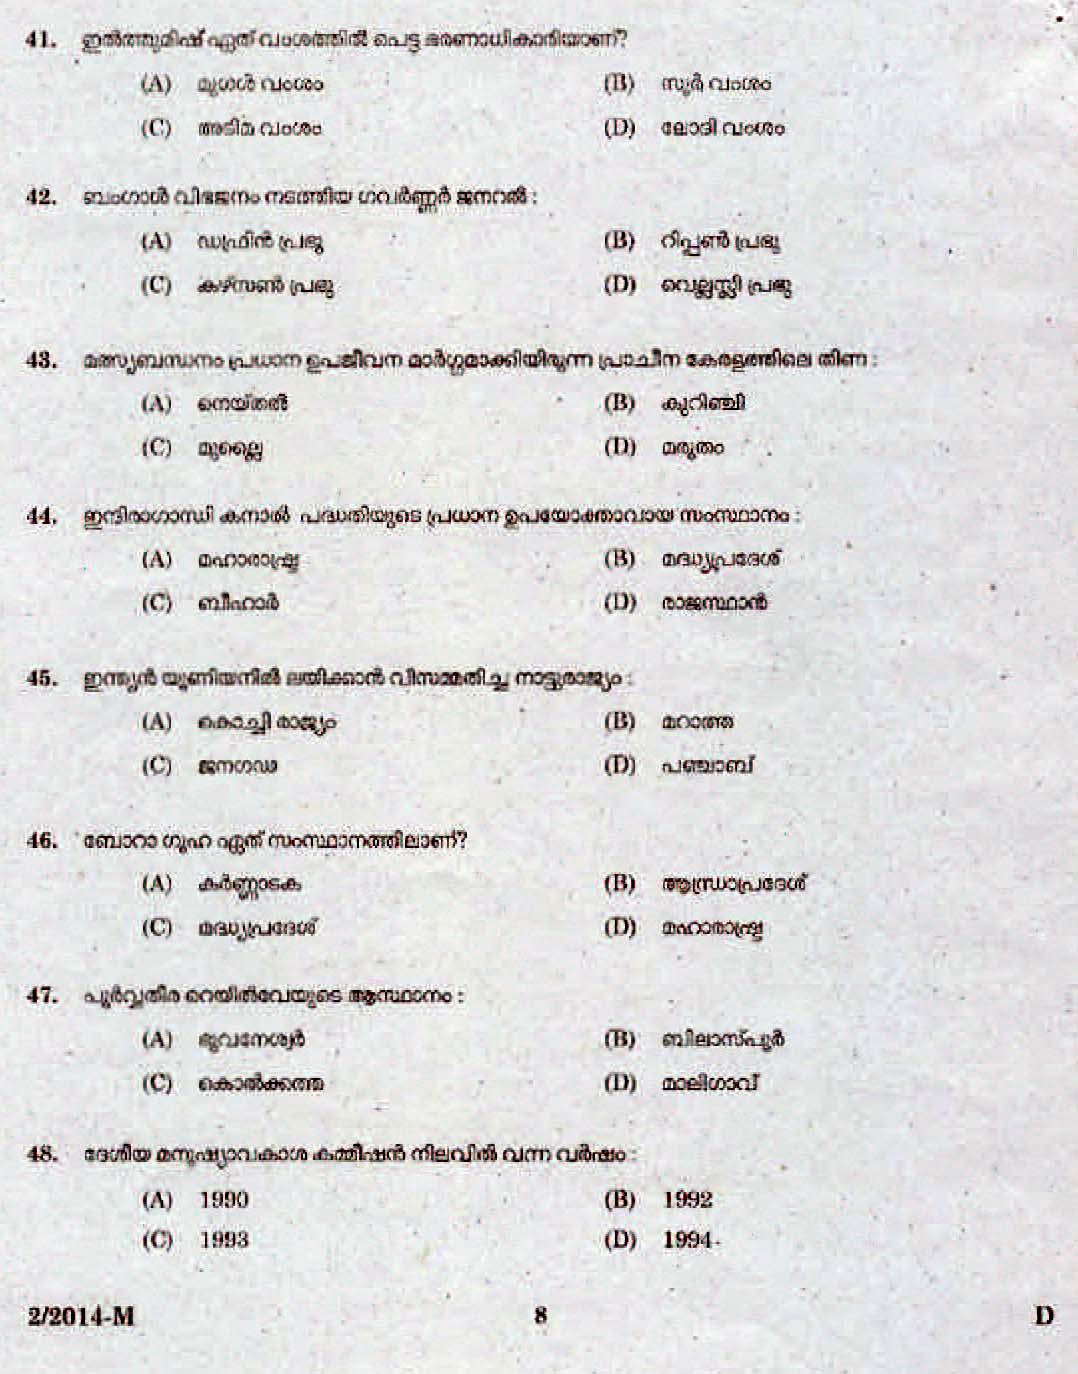 LD Clerk Question Paper Malayalam 2014 Paper Code 022014 M 5